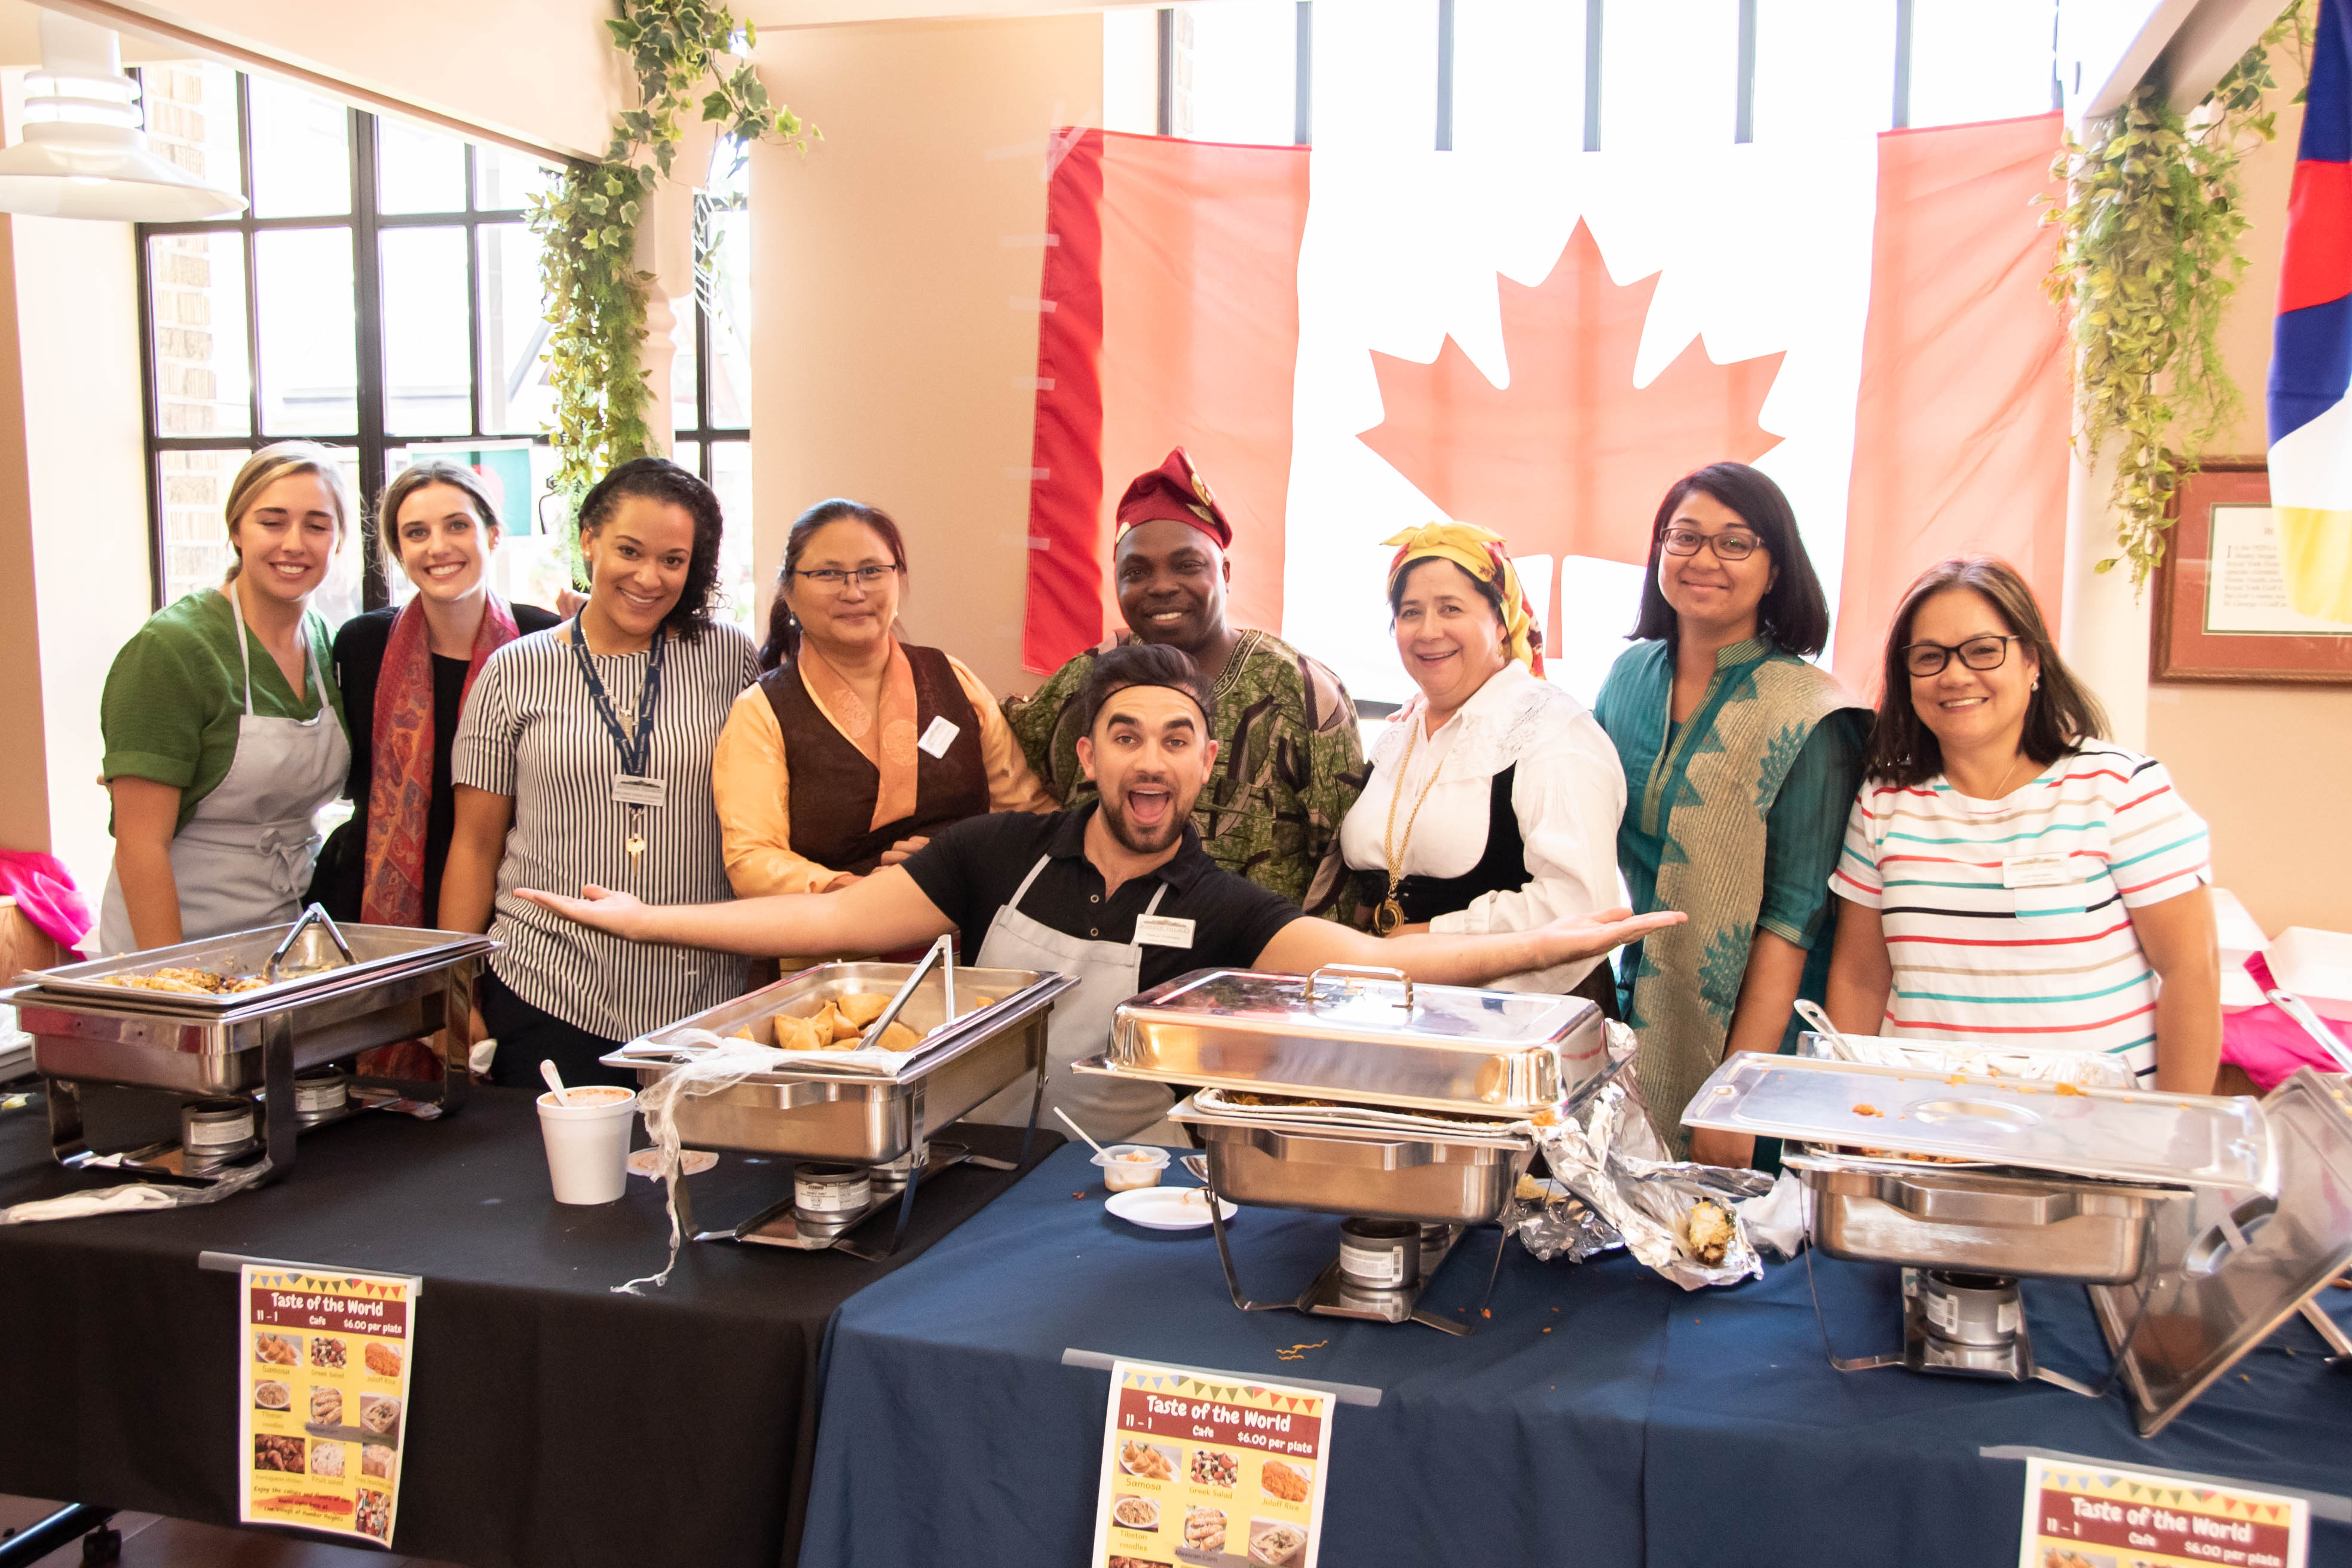 Humber Heights team members celebrated the wonderful cultures of the Village during the final “Diversity Lunch” of the summer.